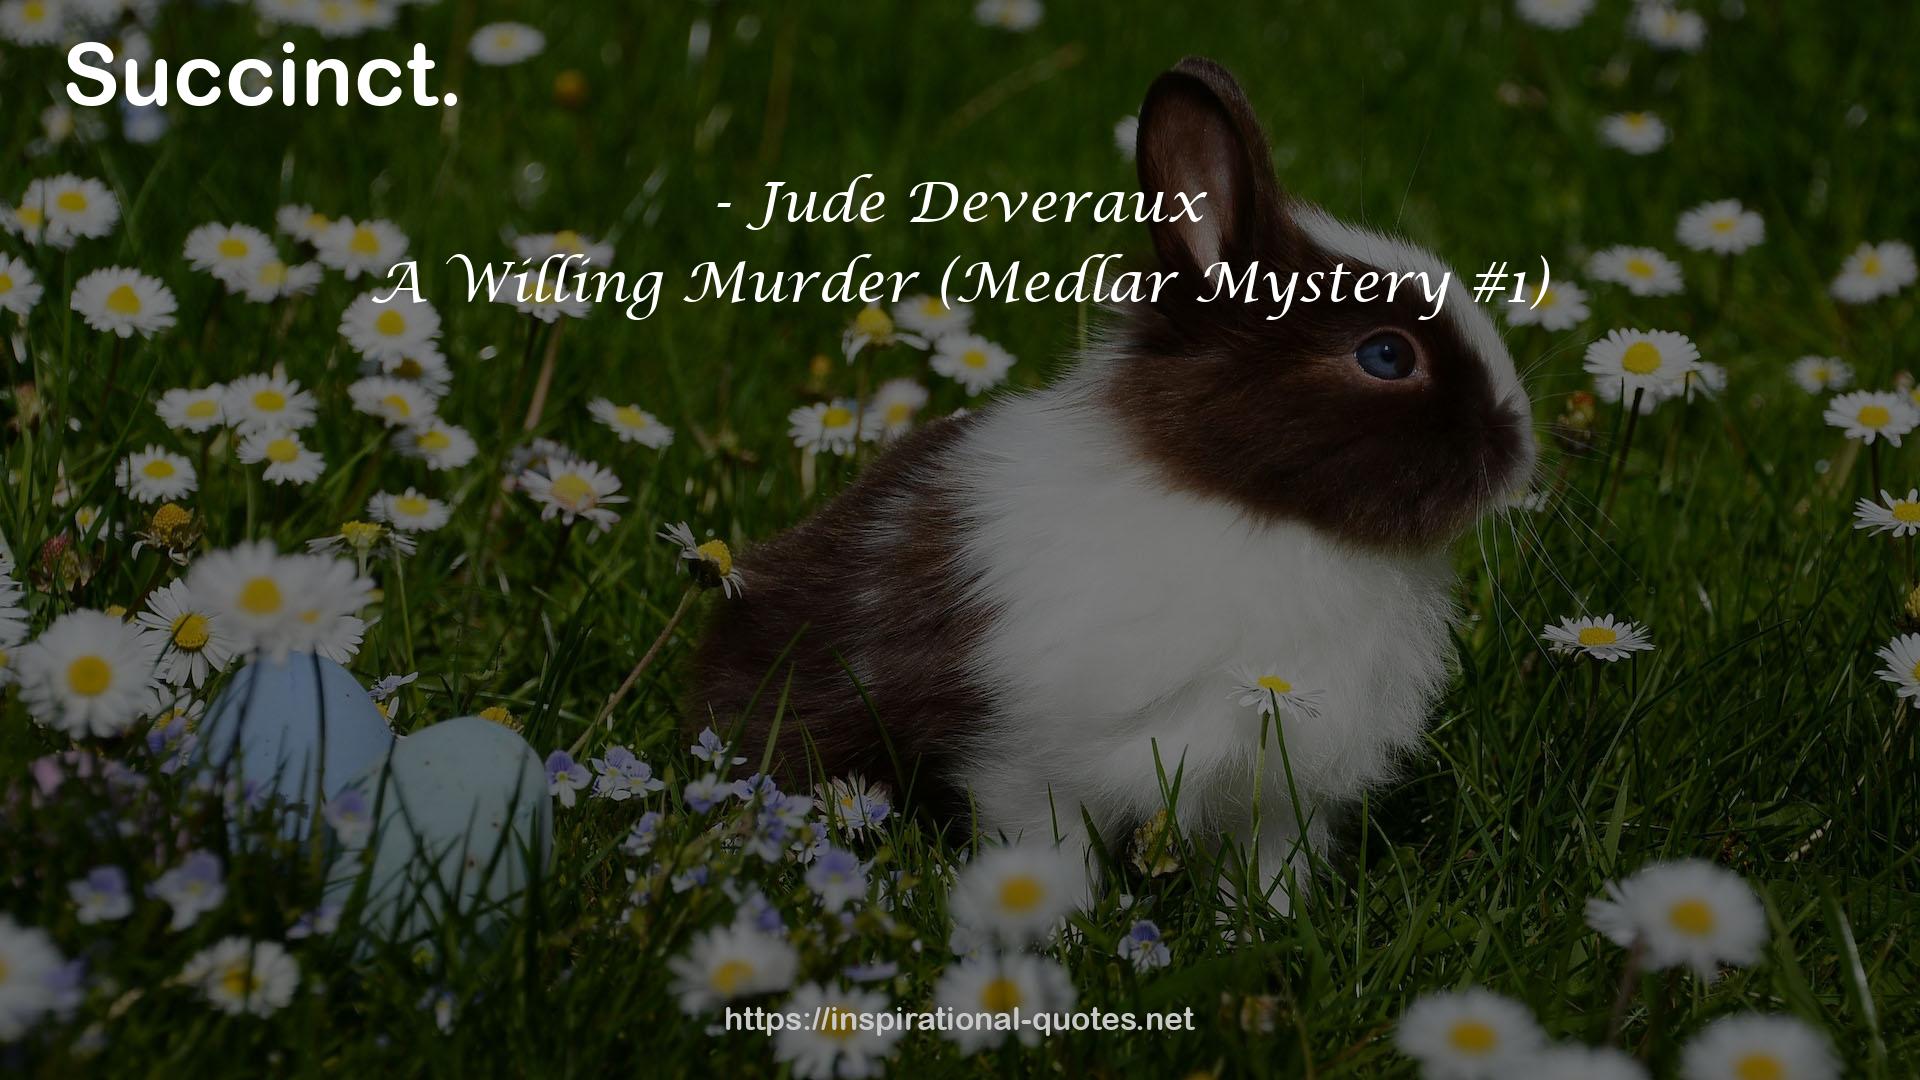 A Willing Murder (Medlar Mystery #1) QUOTES